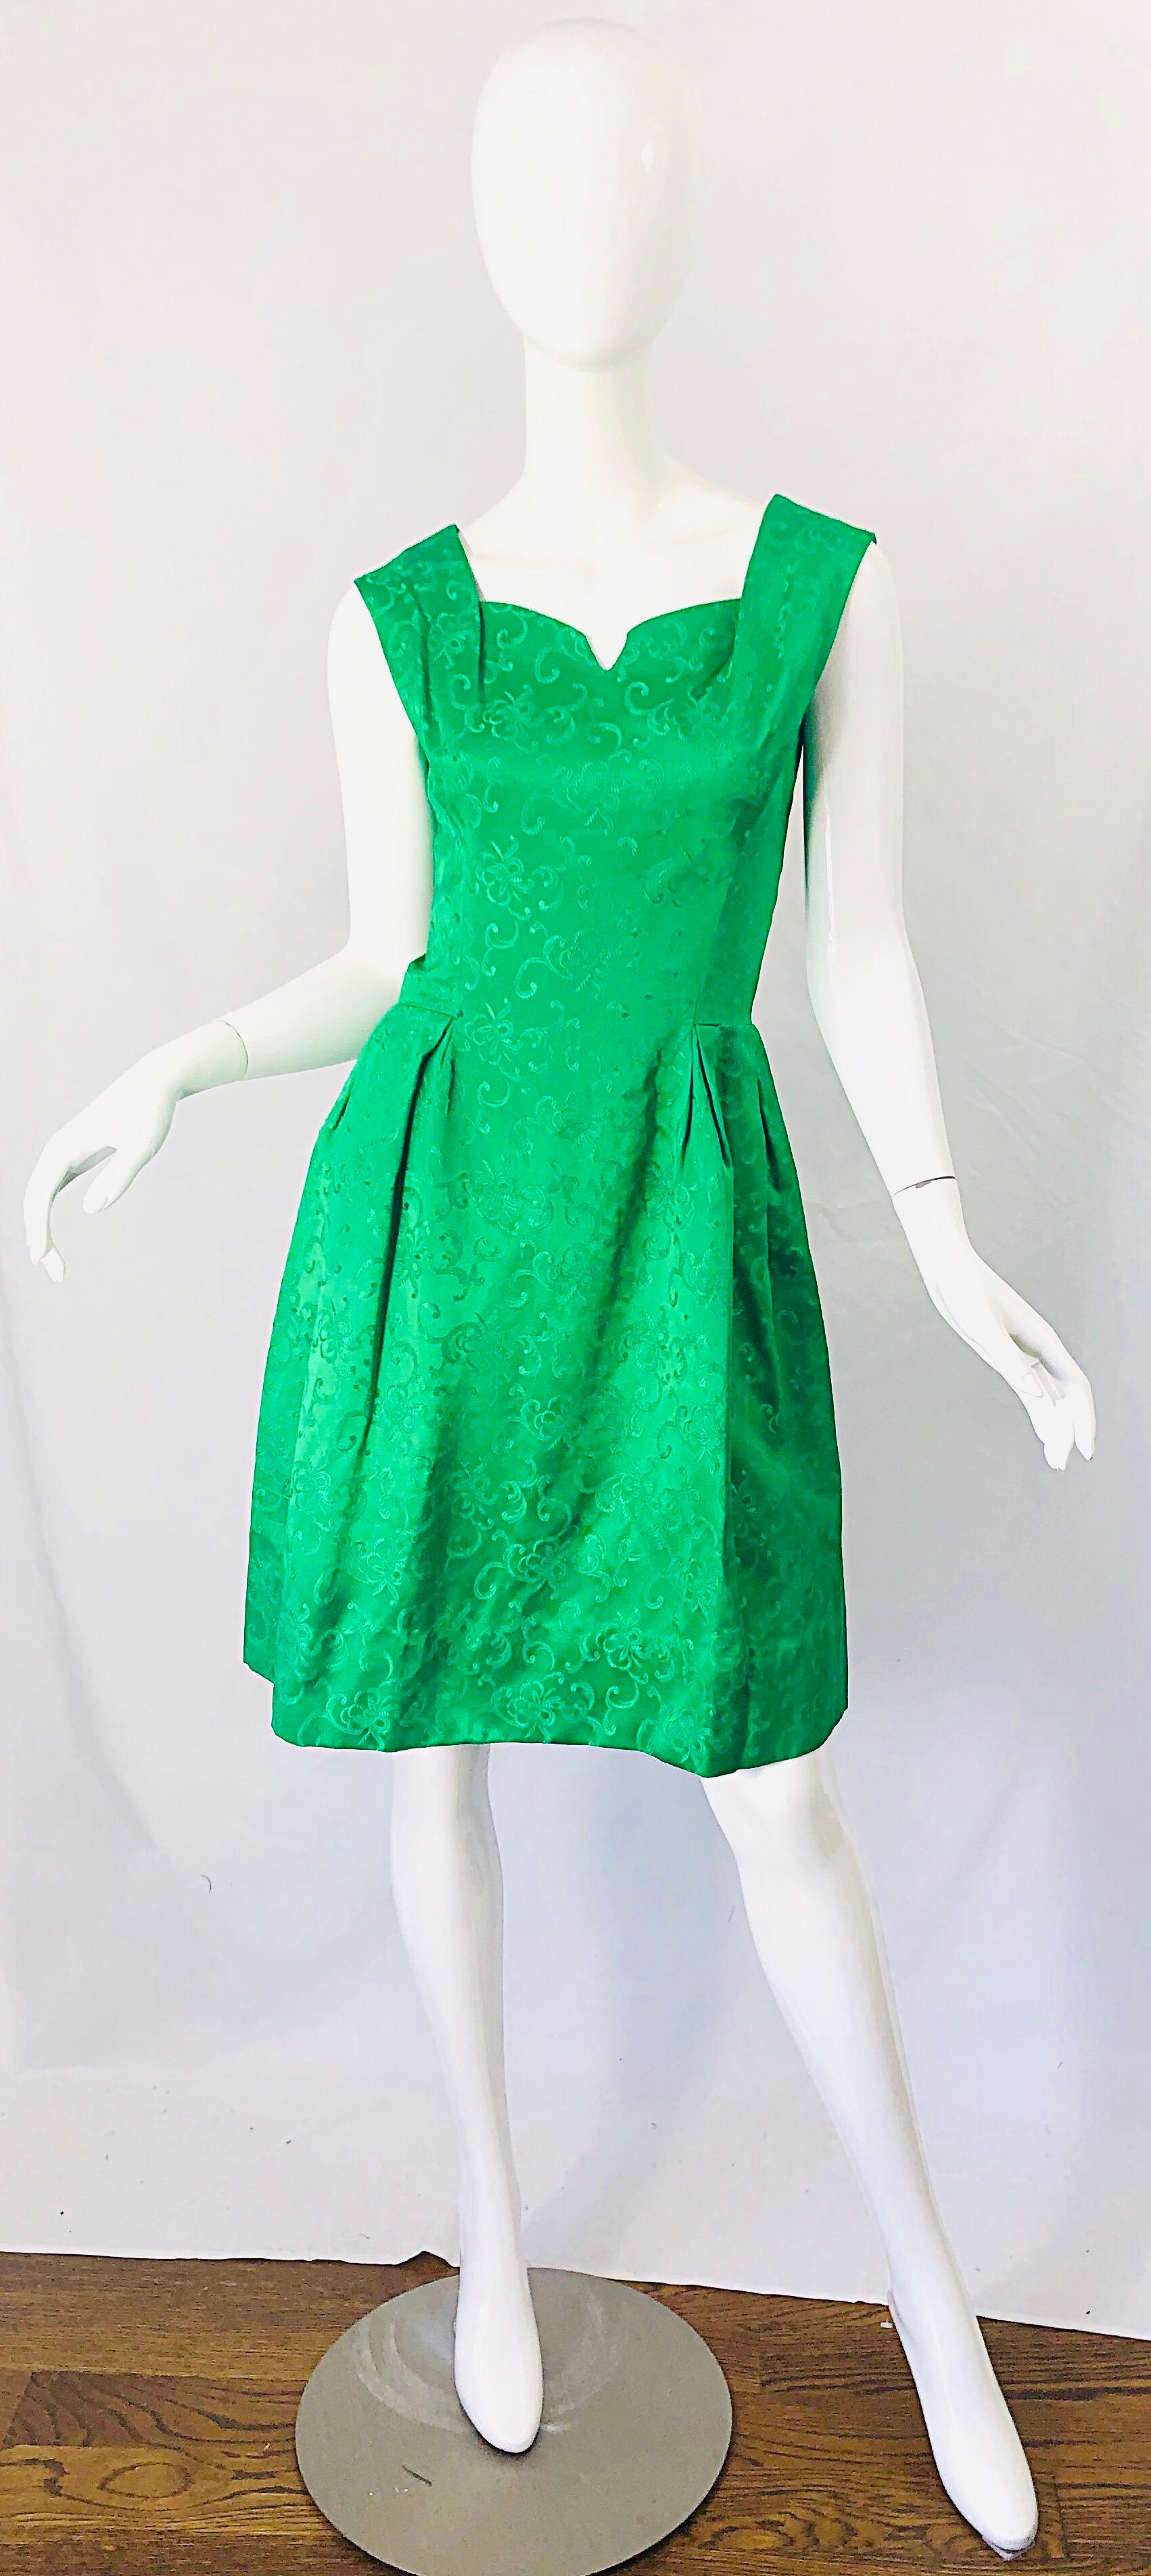 Chic early 60s kelly green silk damask A-Line dress ! Features the perfect rich hue of green. Tailored bodice with a forgiving A-Line skirt. Full metal zipper up the back with hook-and-eye closure. Intricate pleats and folds. Very well made with